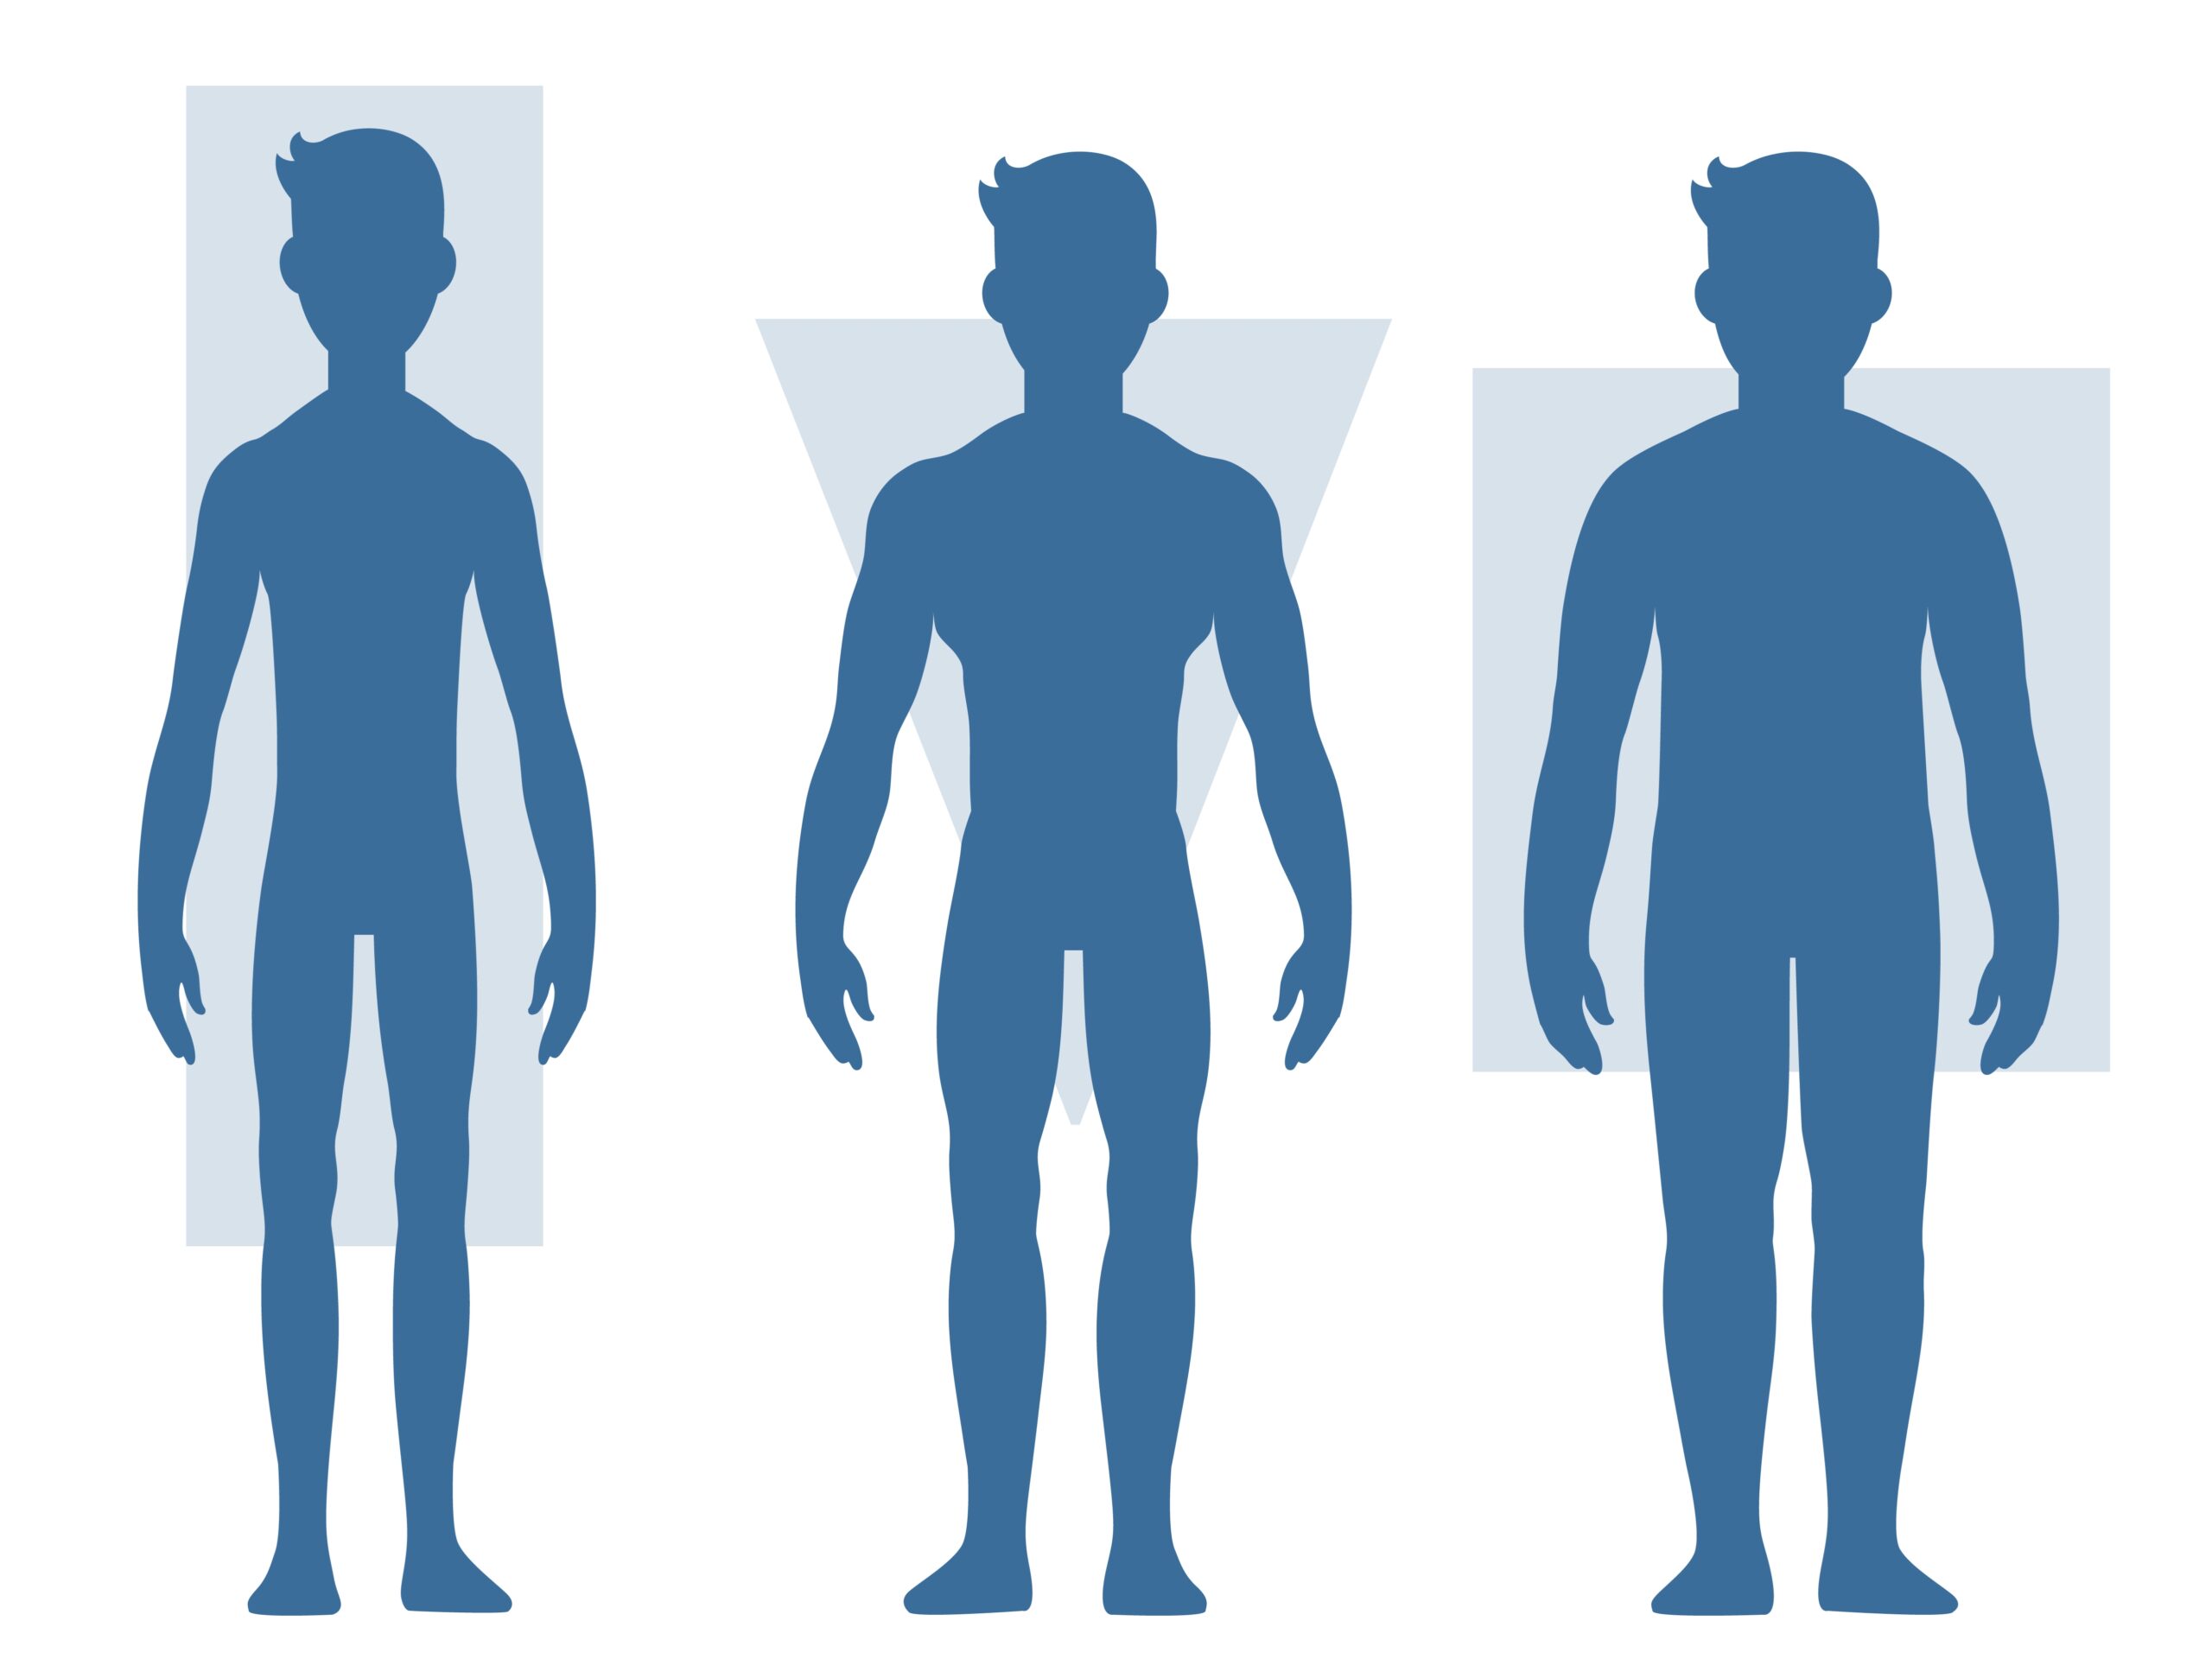 rugby body types